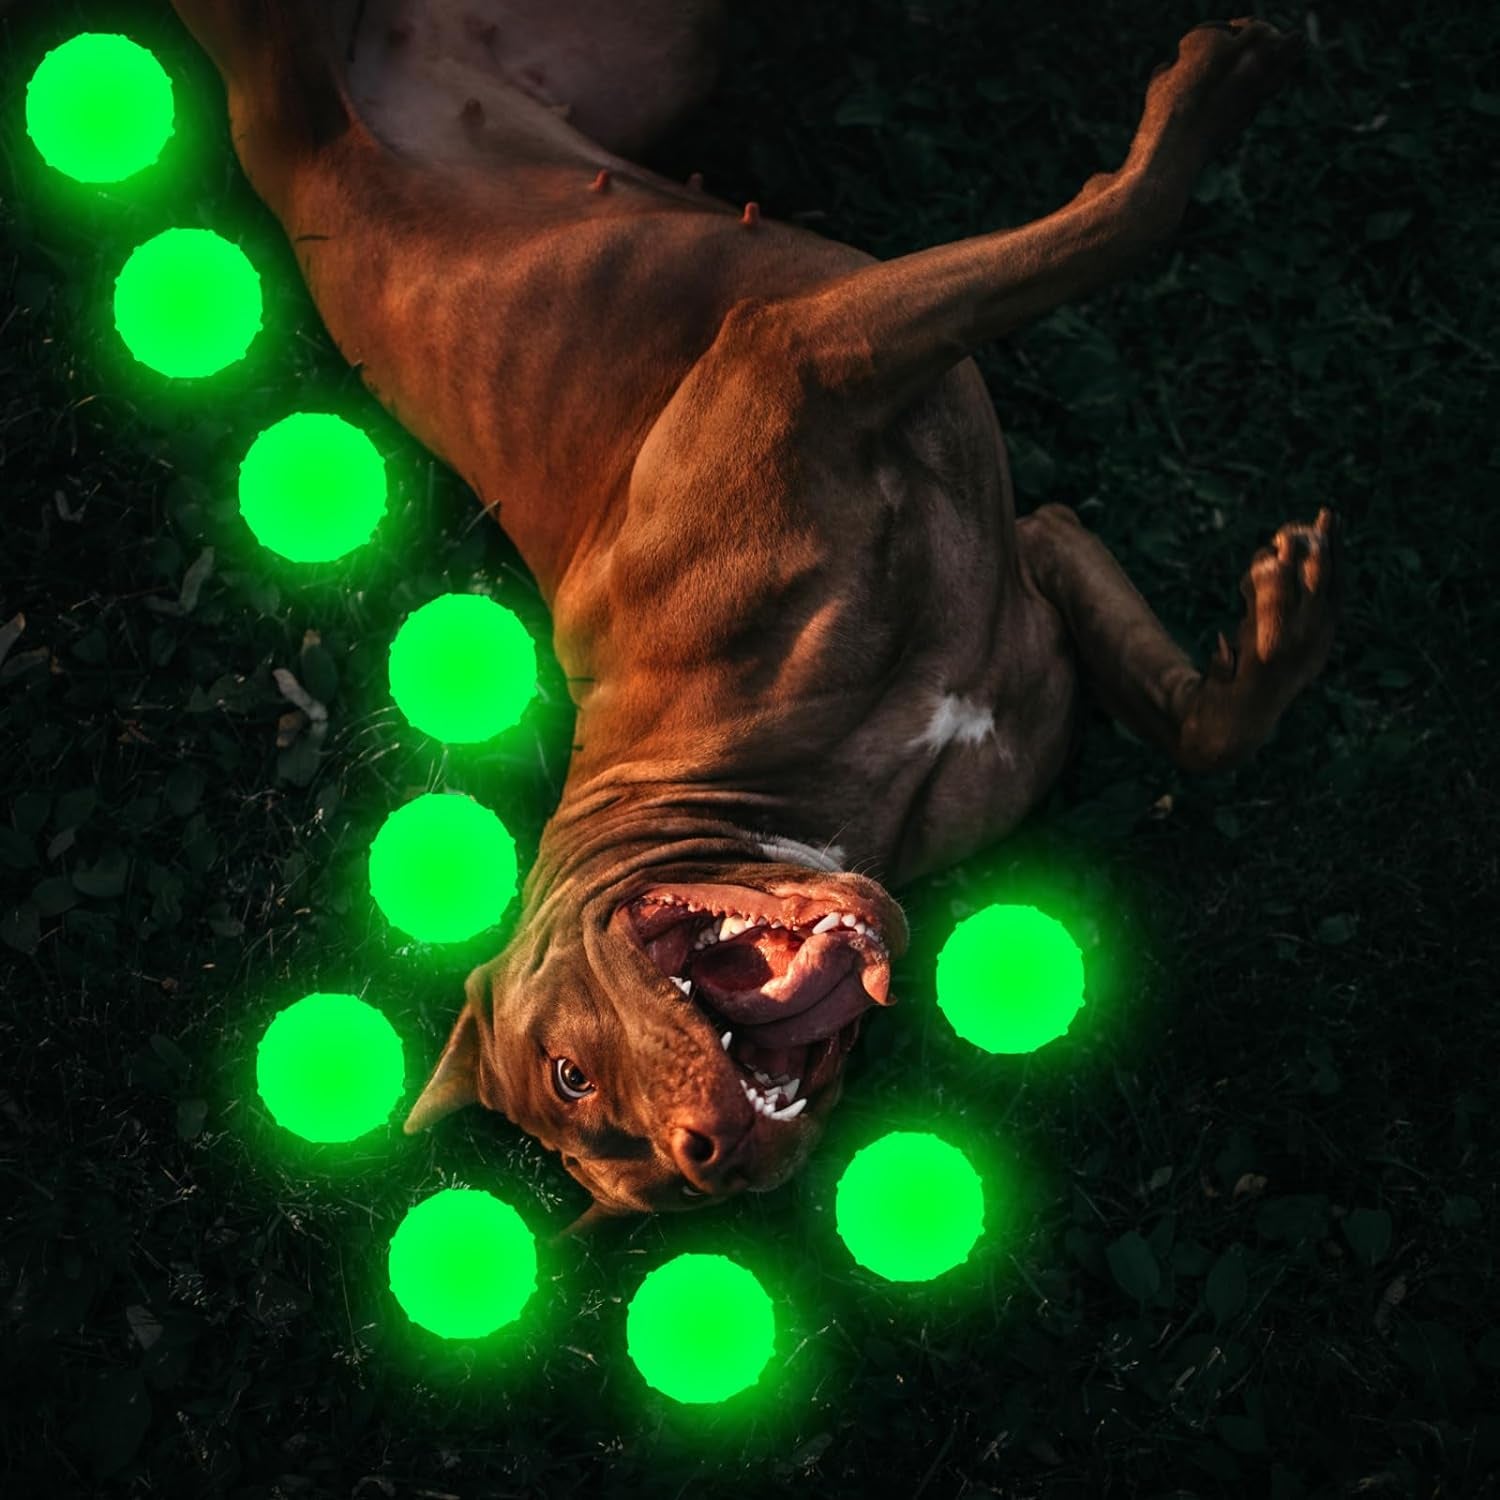 Liliful 10 Pcs Glow in the Dark Dog Toys 2.4 Inch Dog Balls Rubber Glowing Fetch Ball with Net Bag for Puppy Small Medium Dogs